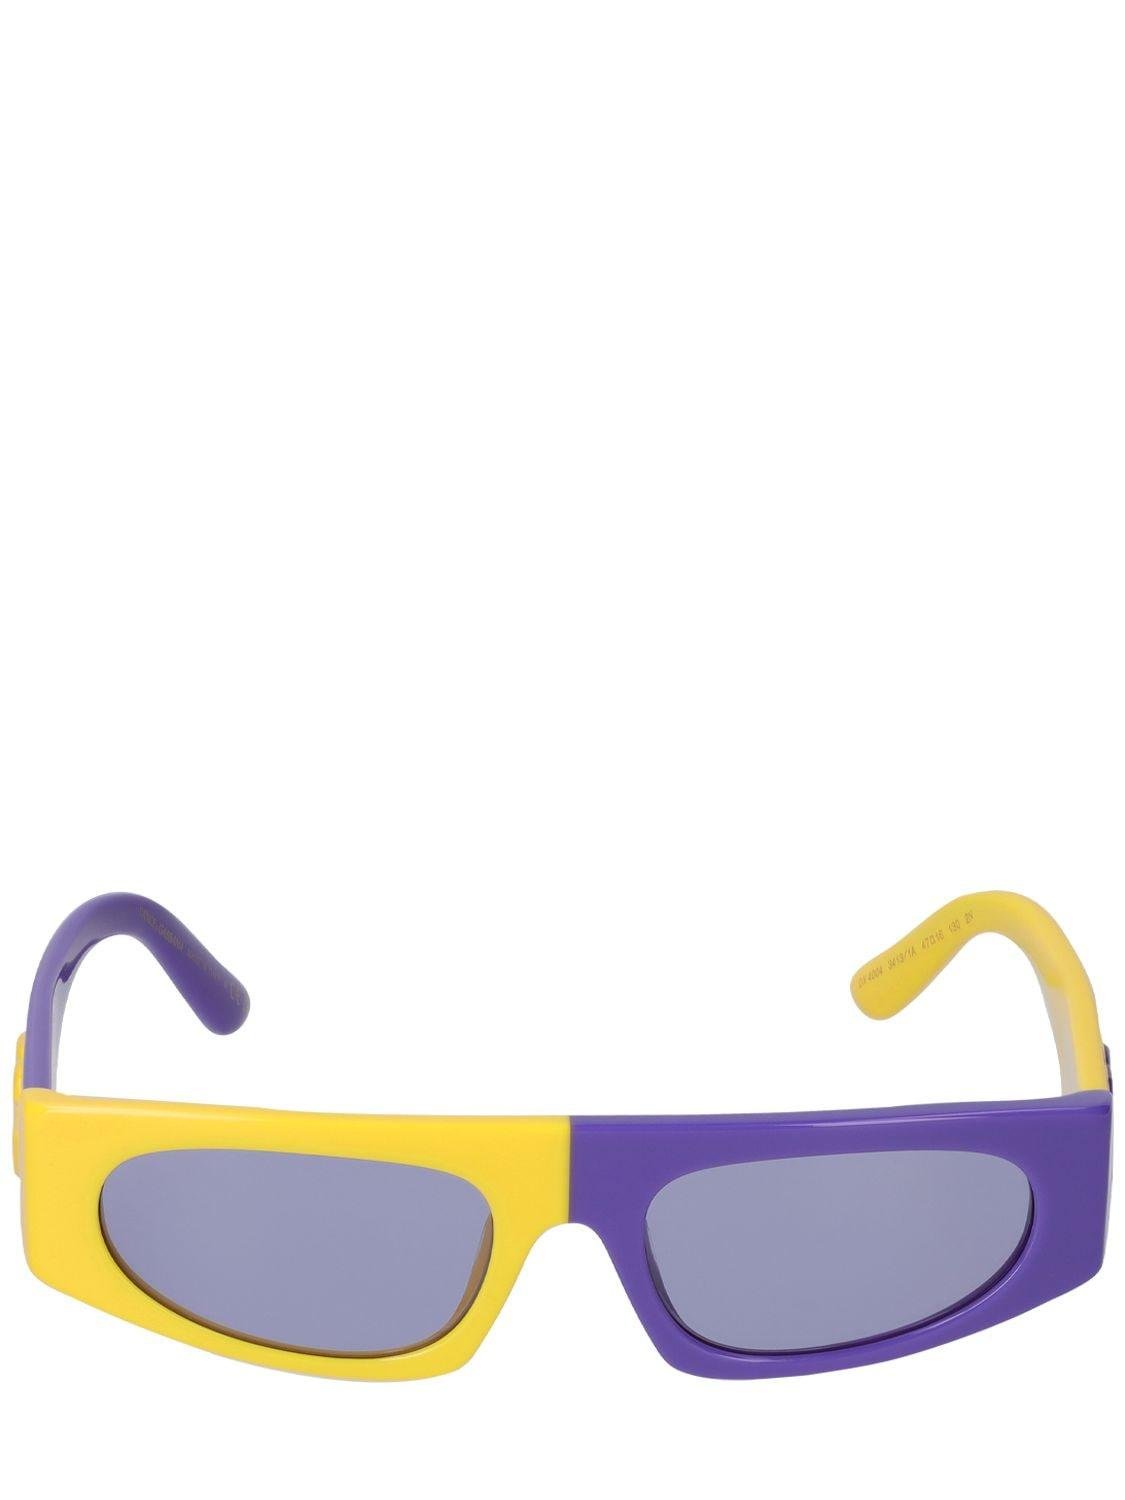 Two Tone Squared Acetate Sunglasses by DOLCE&GABBANA